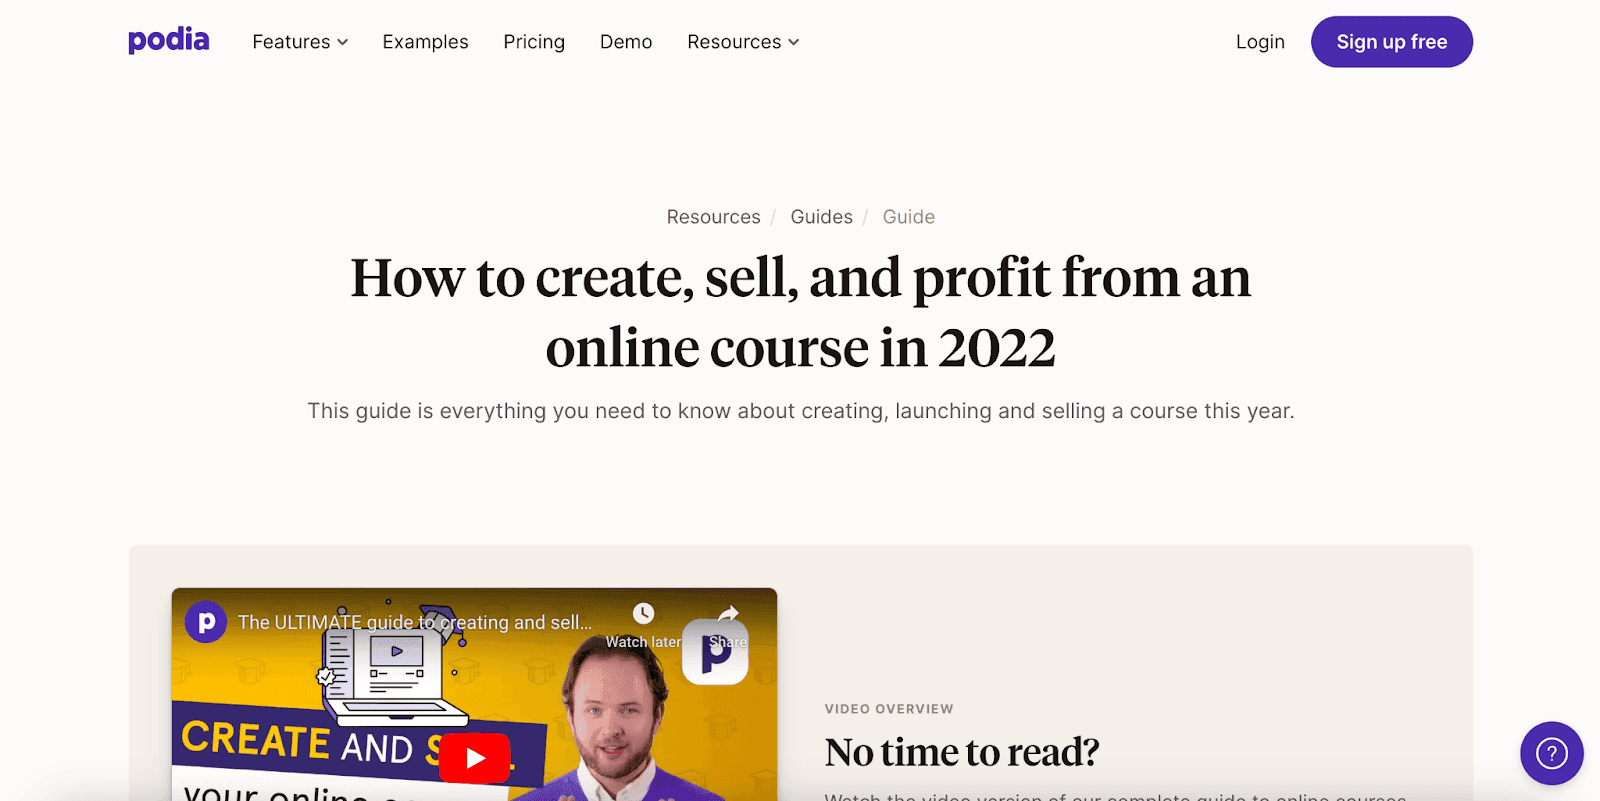 Podias guide to selling an online course in 2022